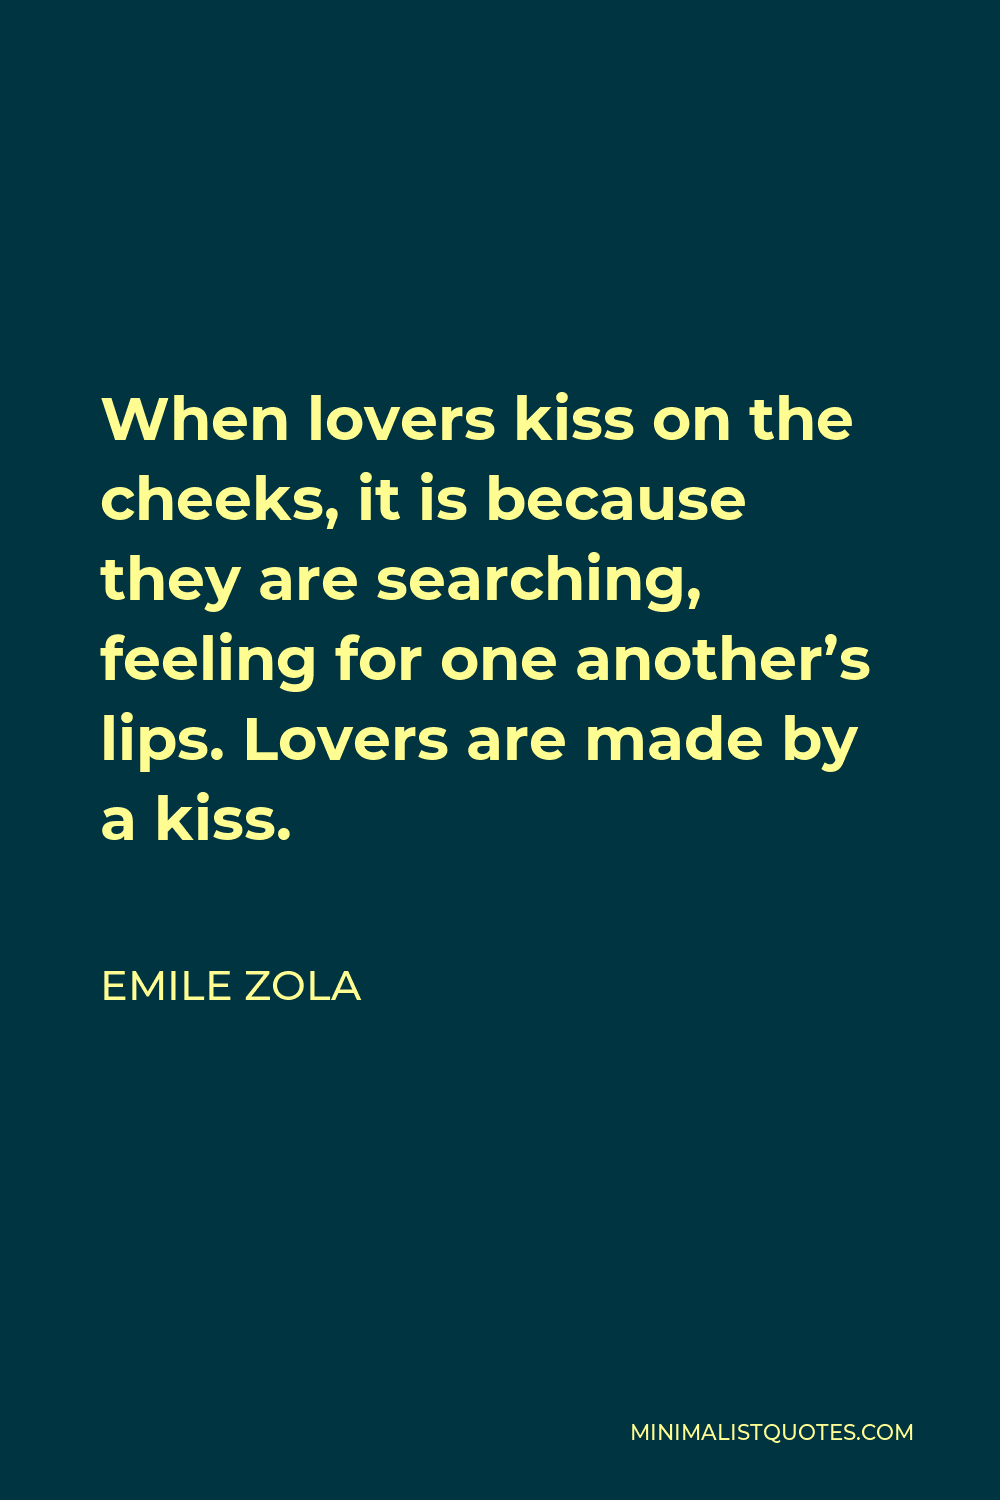 Emile Zola Quote - When lovers kiss on the cheeks, it is because they are searching, feeling for one another’s lips. Lovers are made by a kiss.